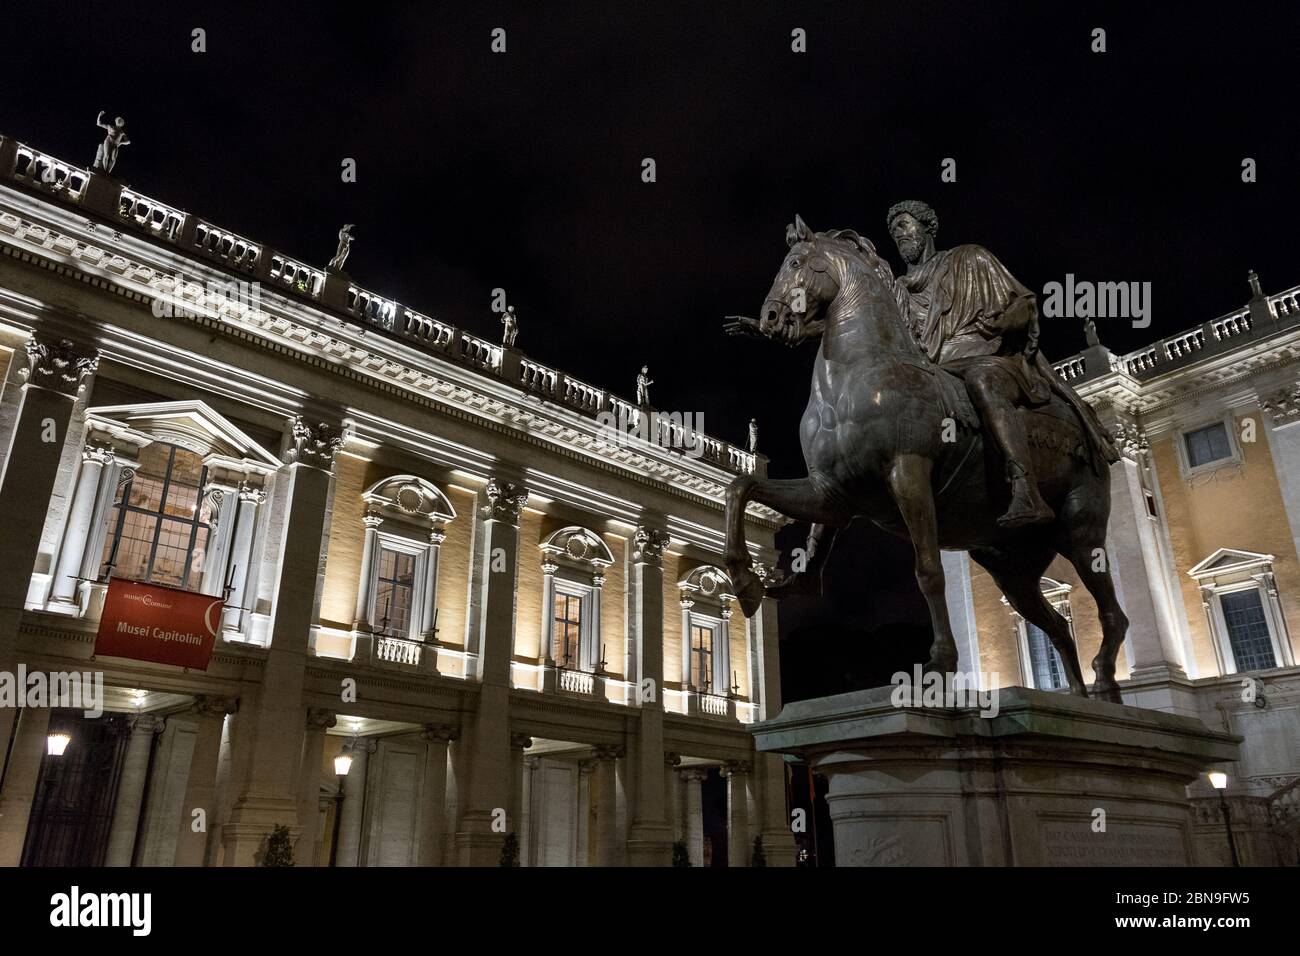 Rome, Italy: Capitol square of Rome with copy of the statue of Marcus Aurelius on the right and Capitoline museum on the left, by night. Stock Photo